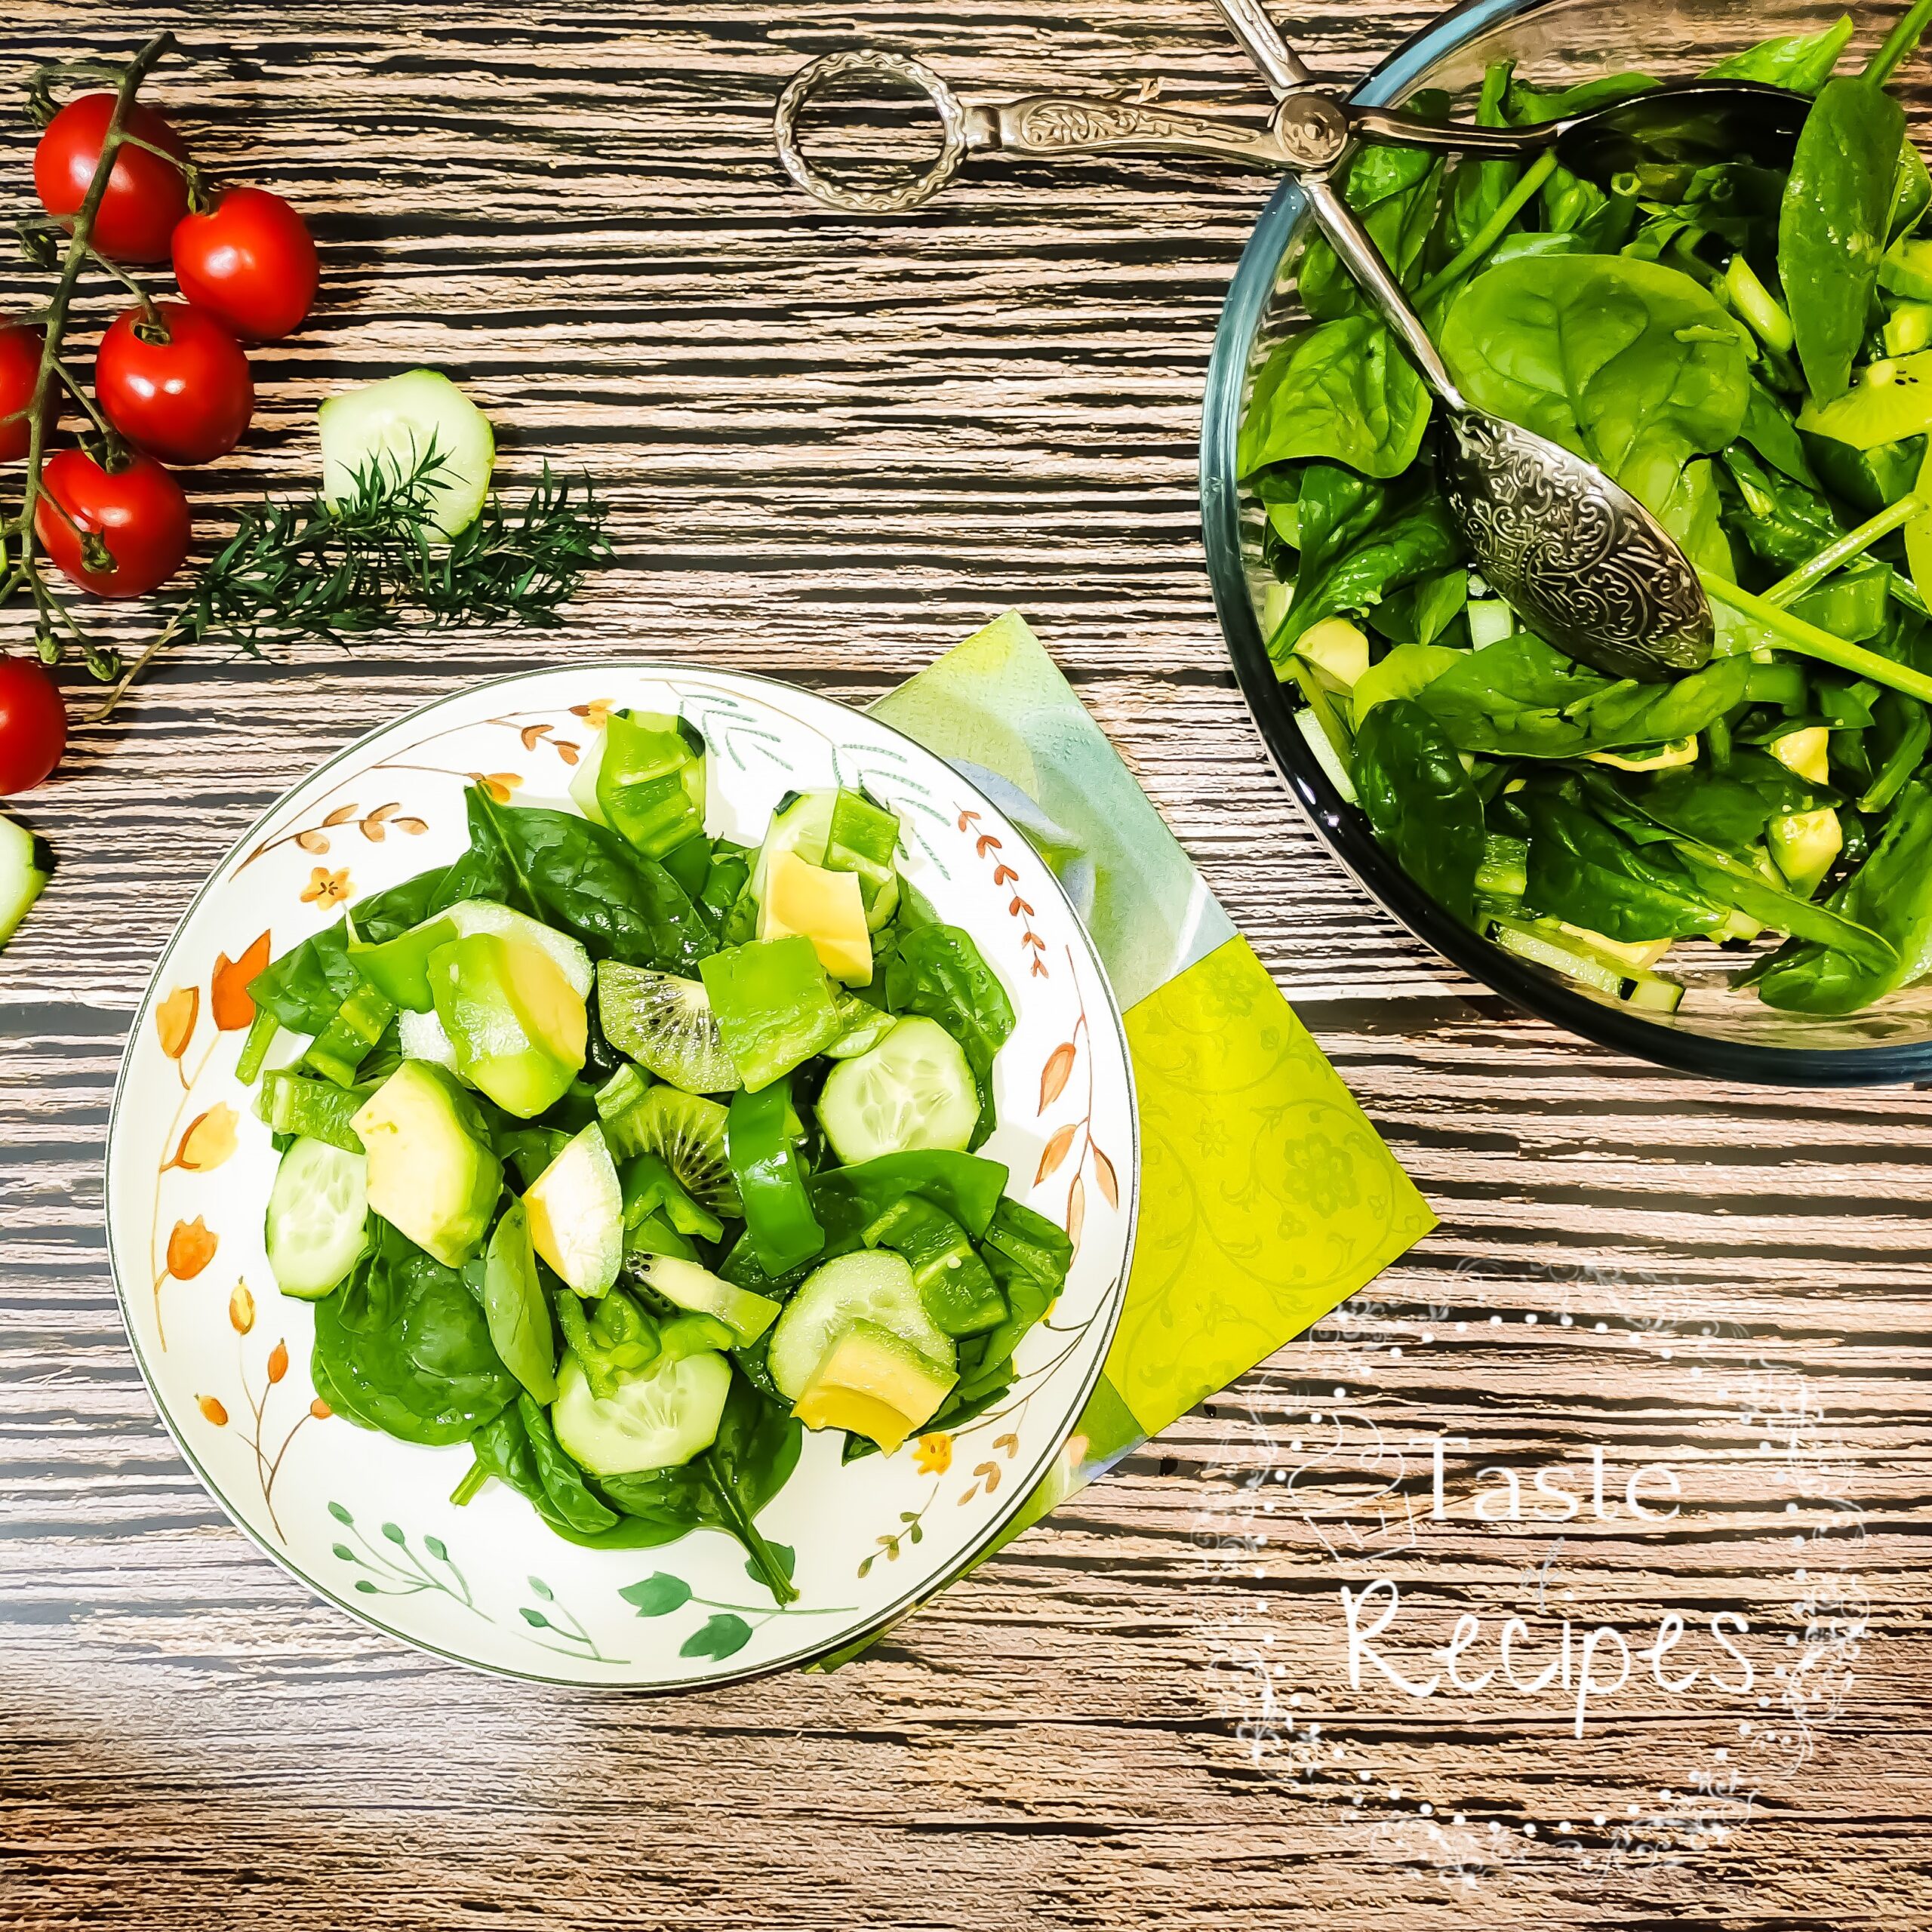 Green Salad Recipe, the chromatic balance on your plate